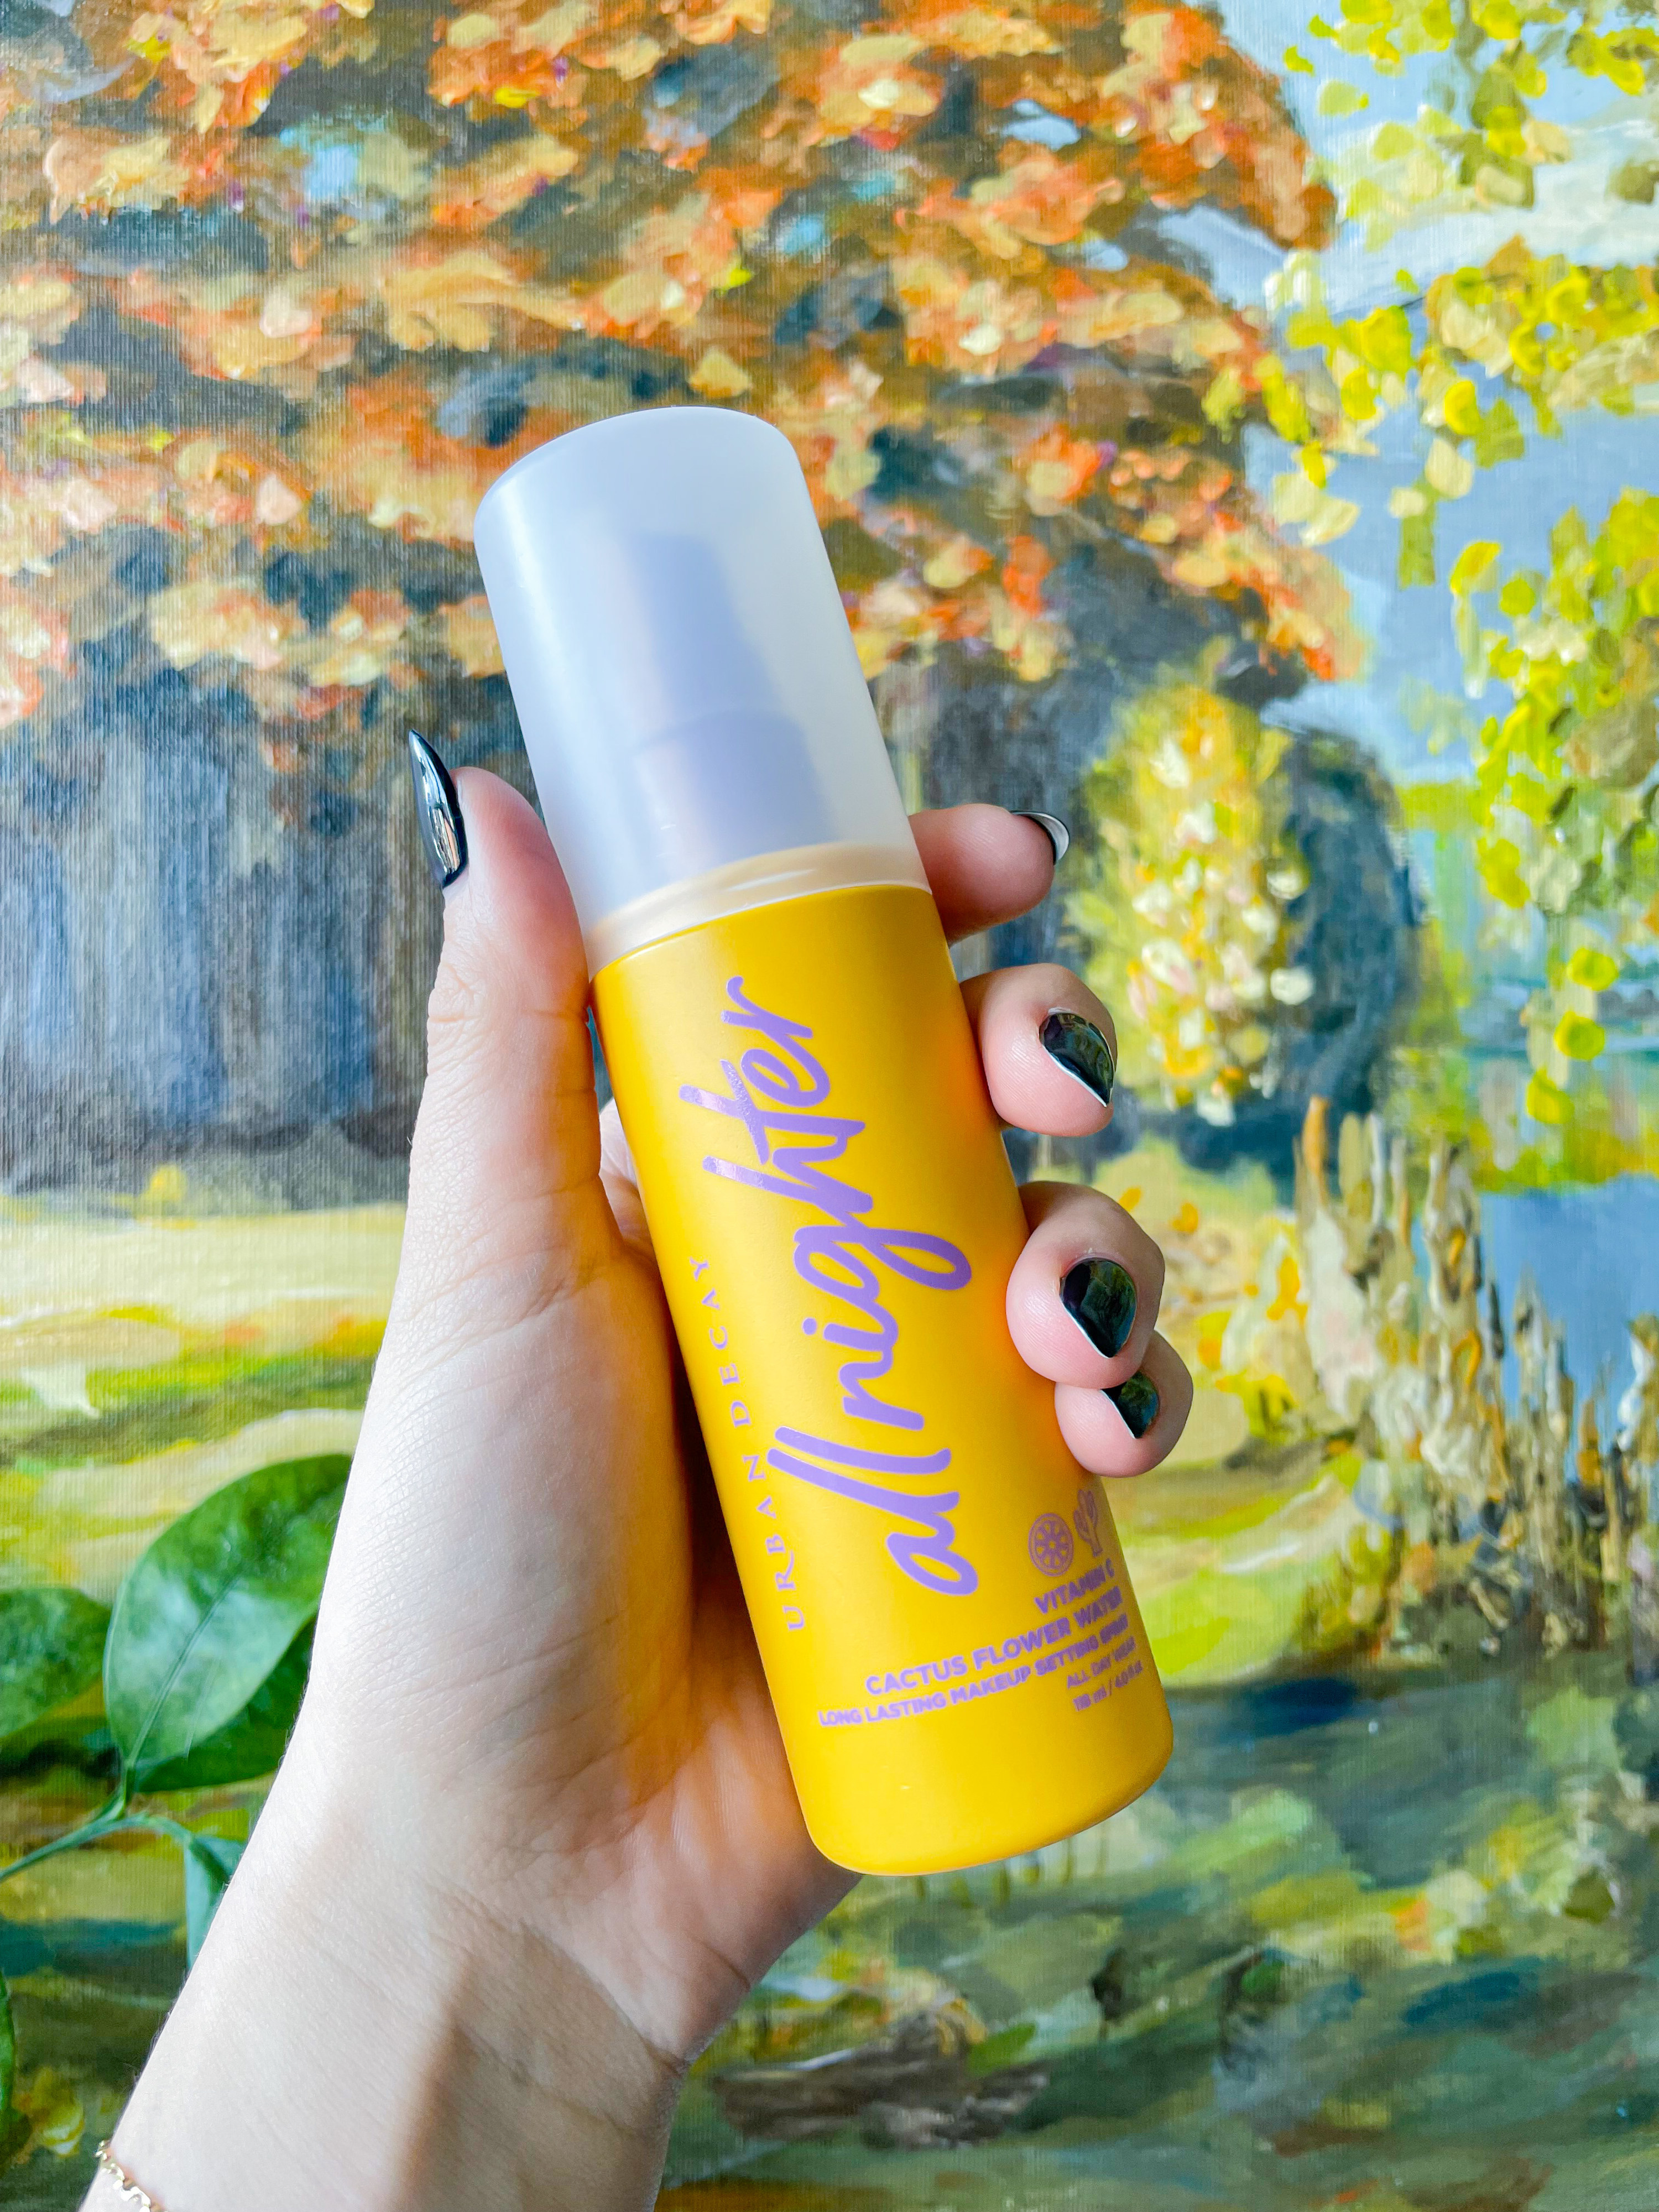 Victoria holding up a bottle of the vitamin c-infused setting spray against a painting